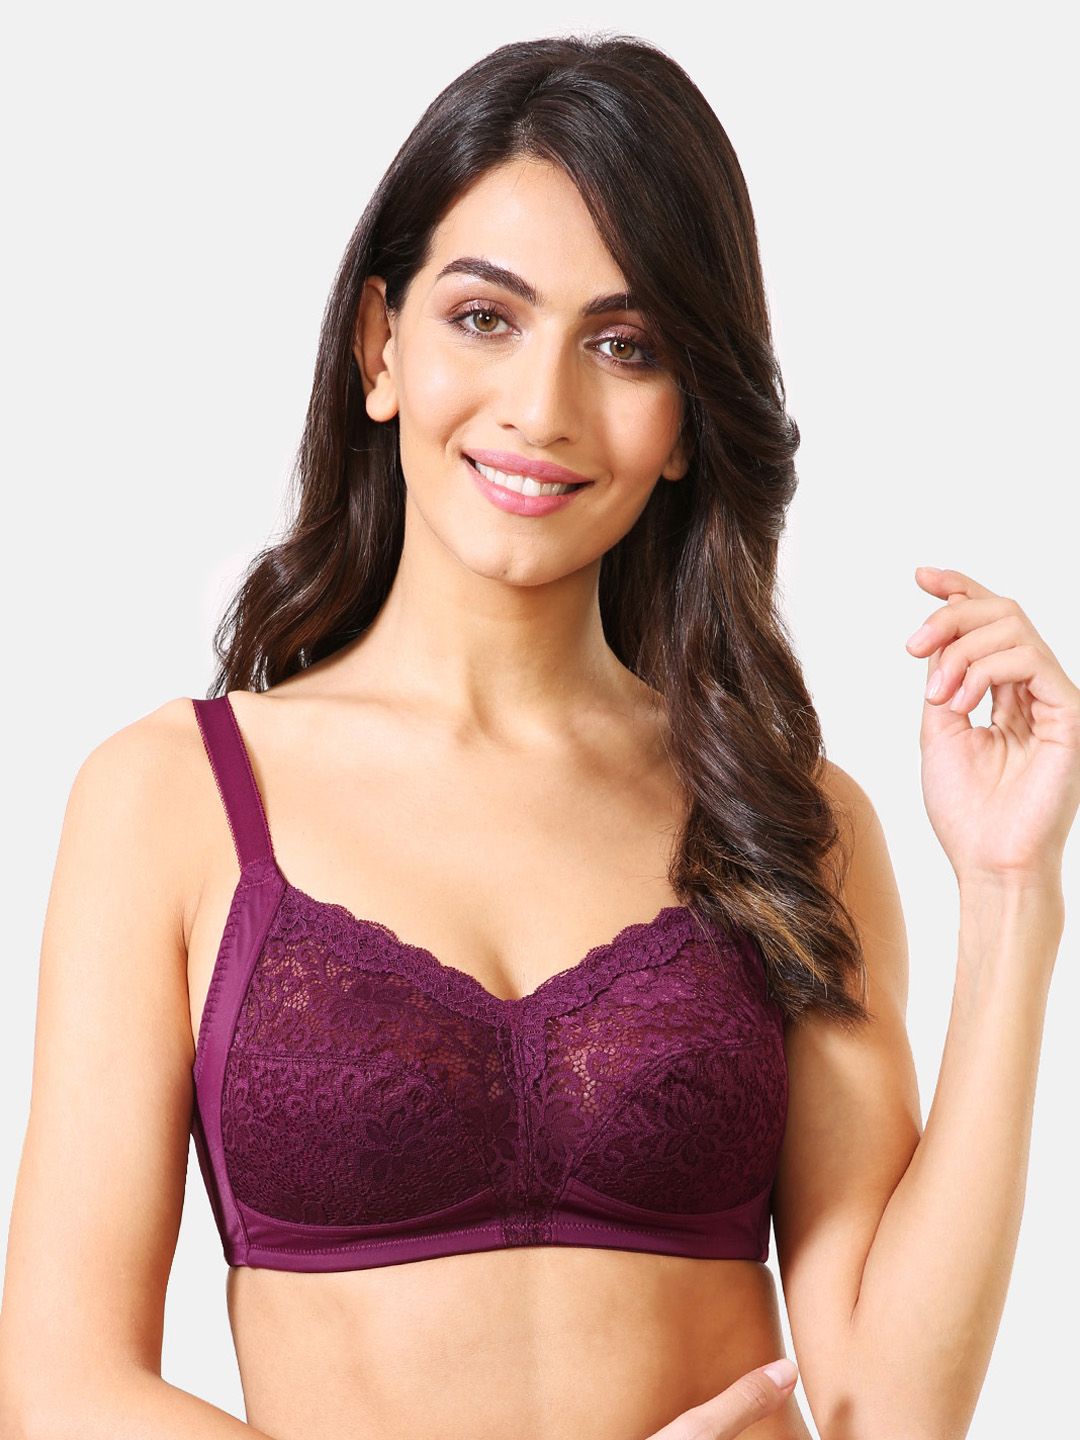 Van Heusen Burgundy Lace Non-Wired Non Padded Everyday Soft Cup Bra ILIBR1LXSWW3022004 Price in India